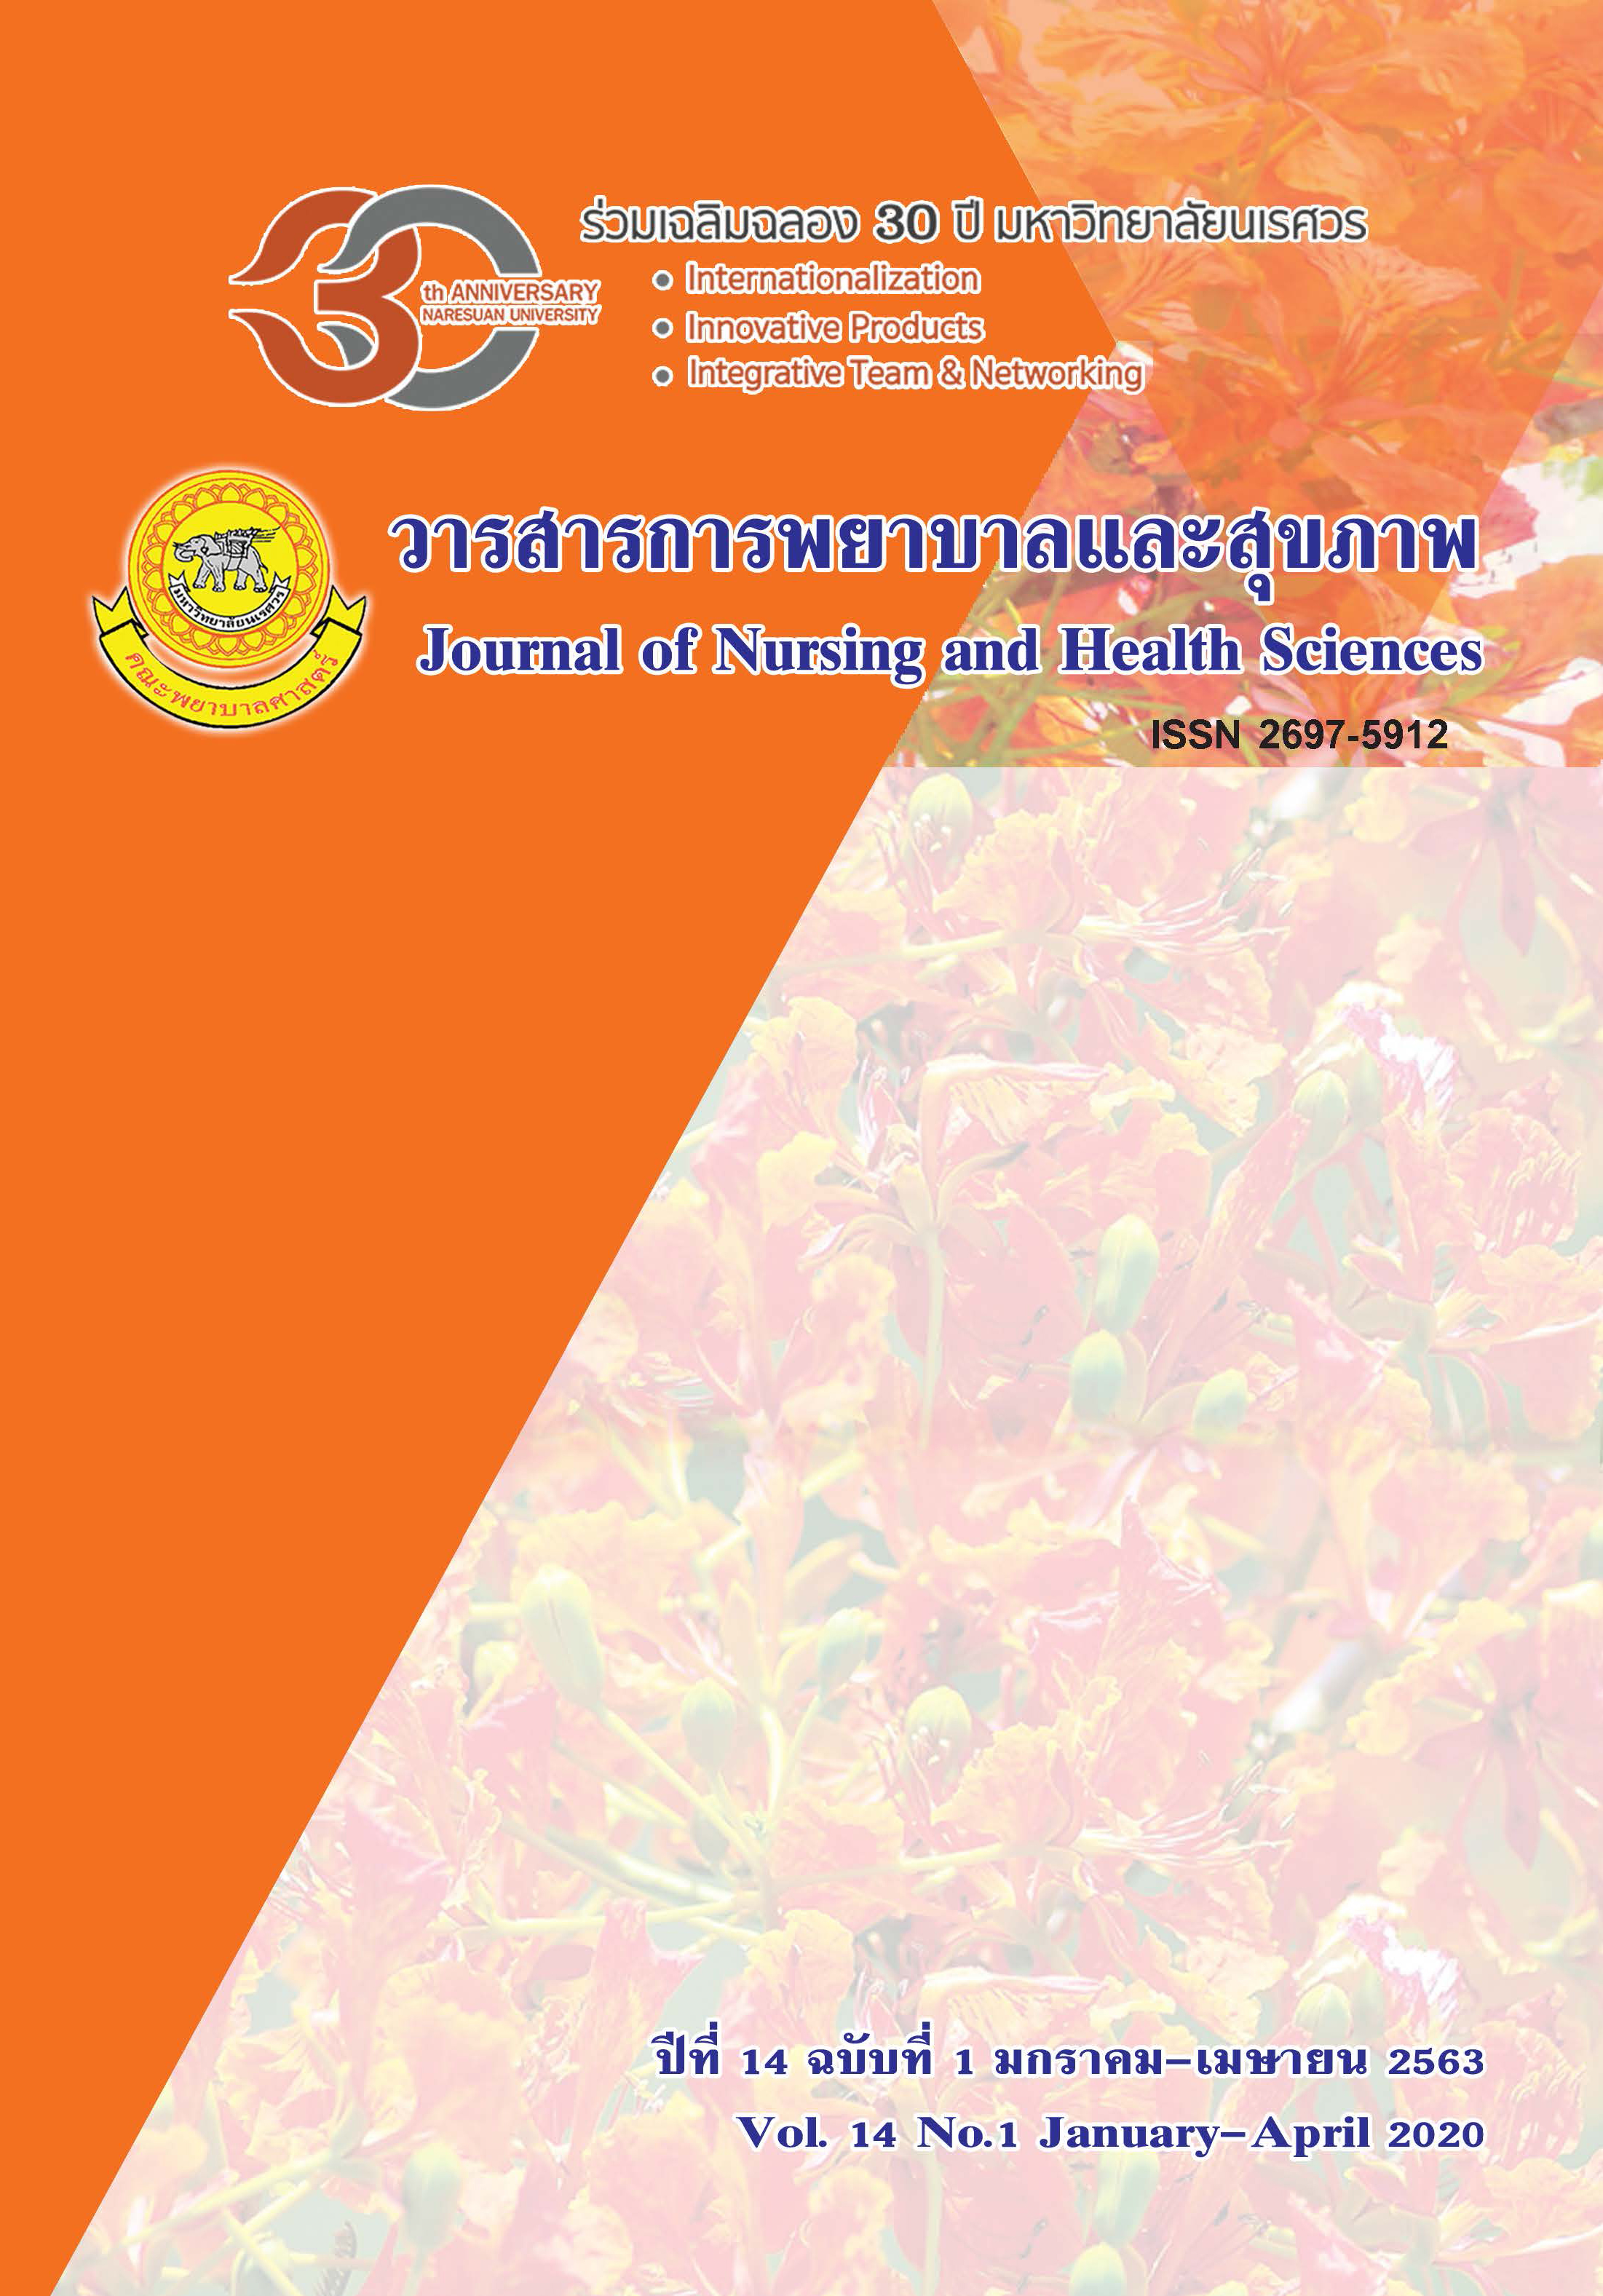 					View Vol. 14 No. 3 (2020): Journal of Nursing and Health Sciences
				